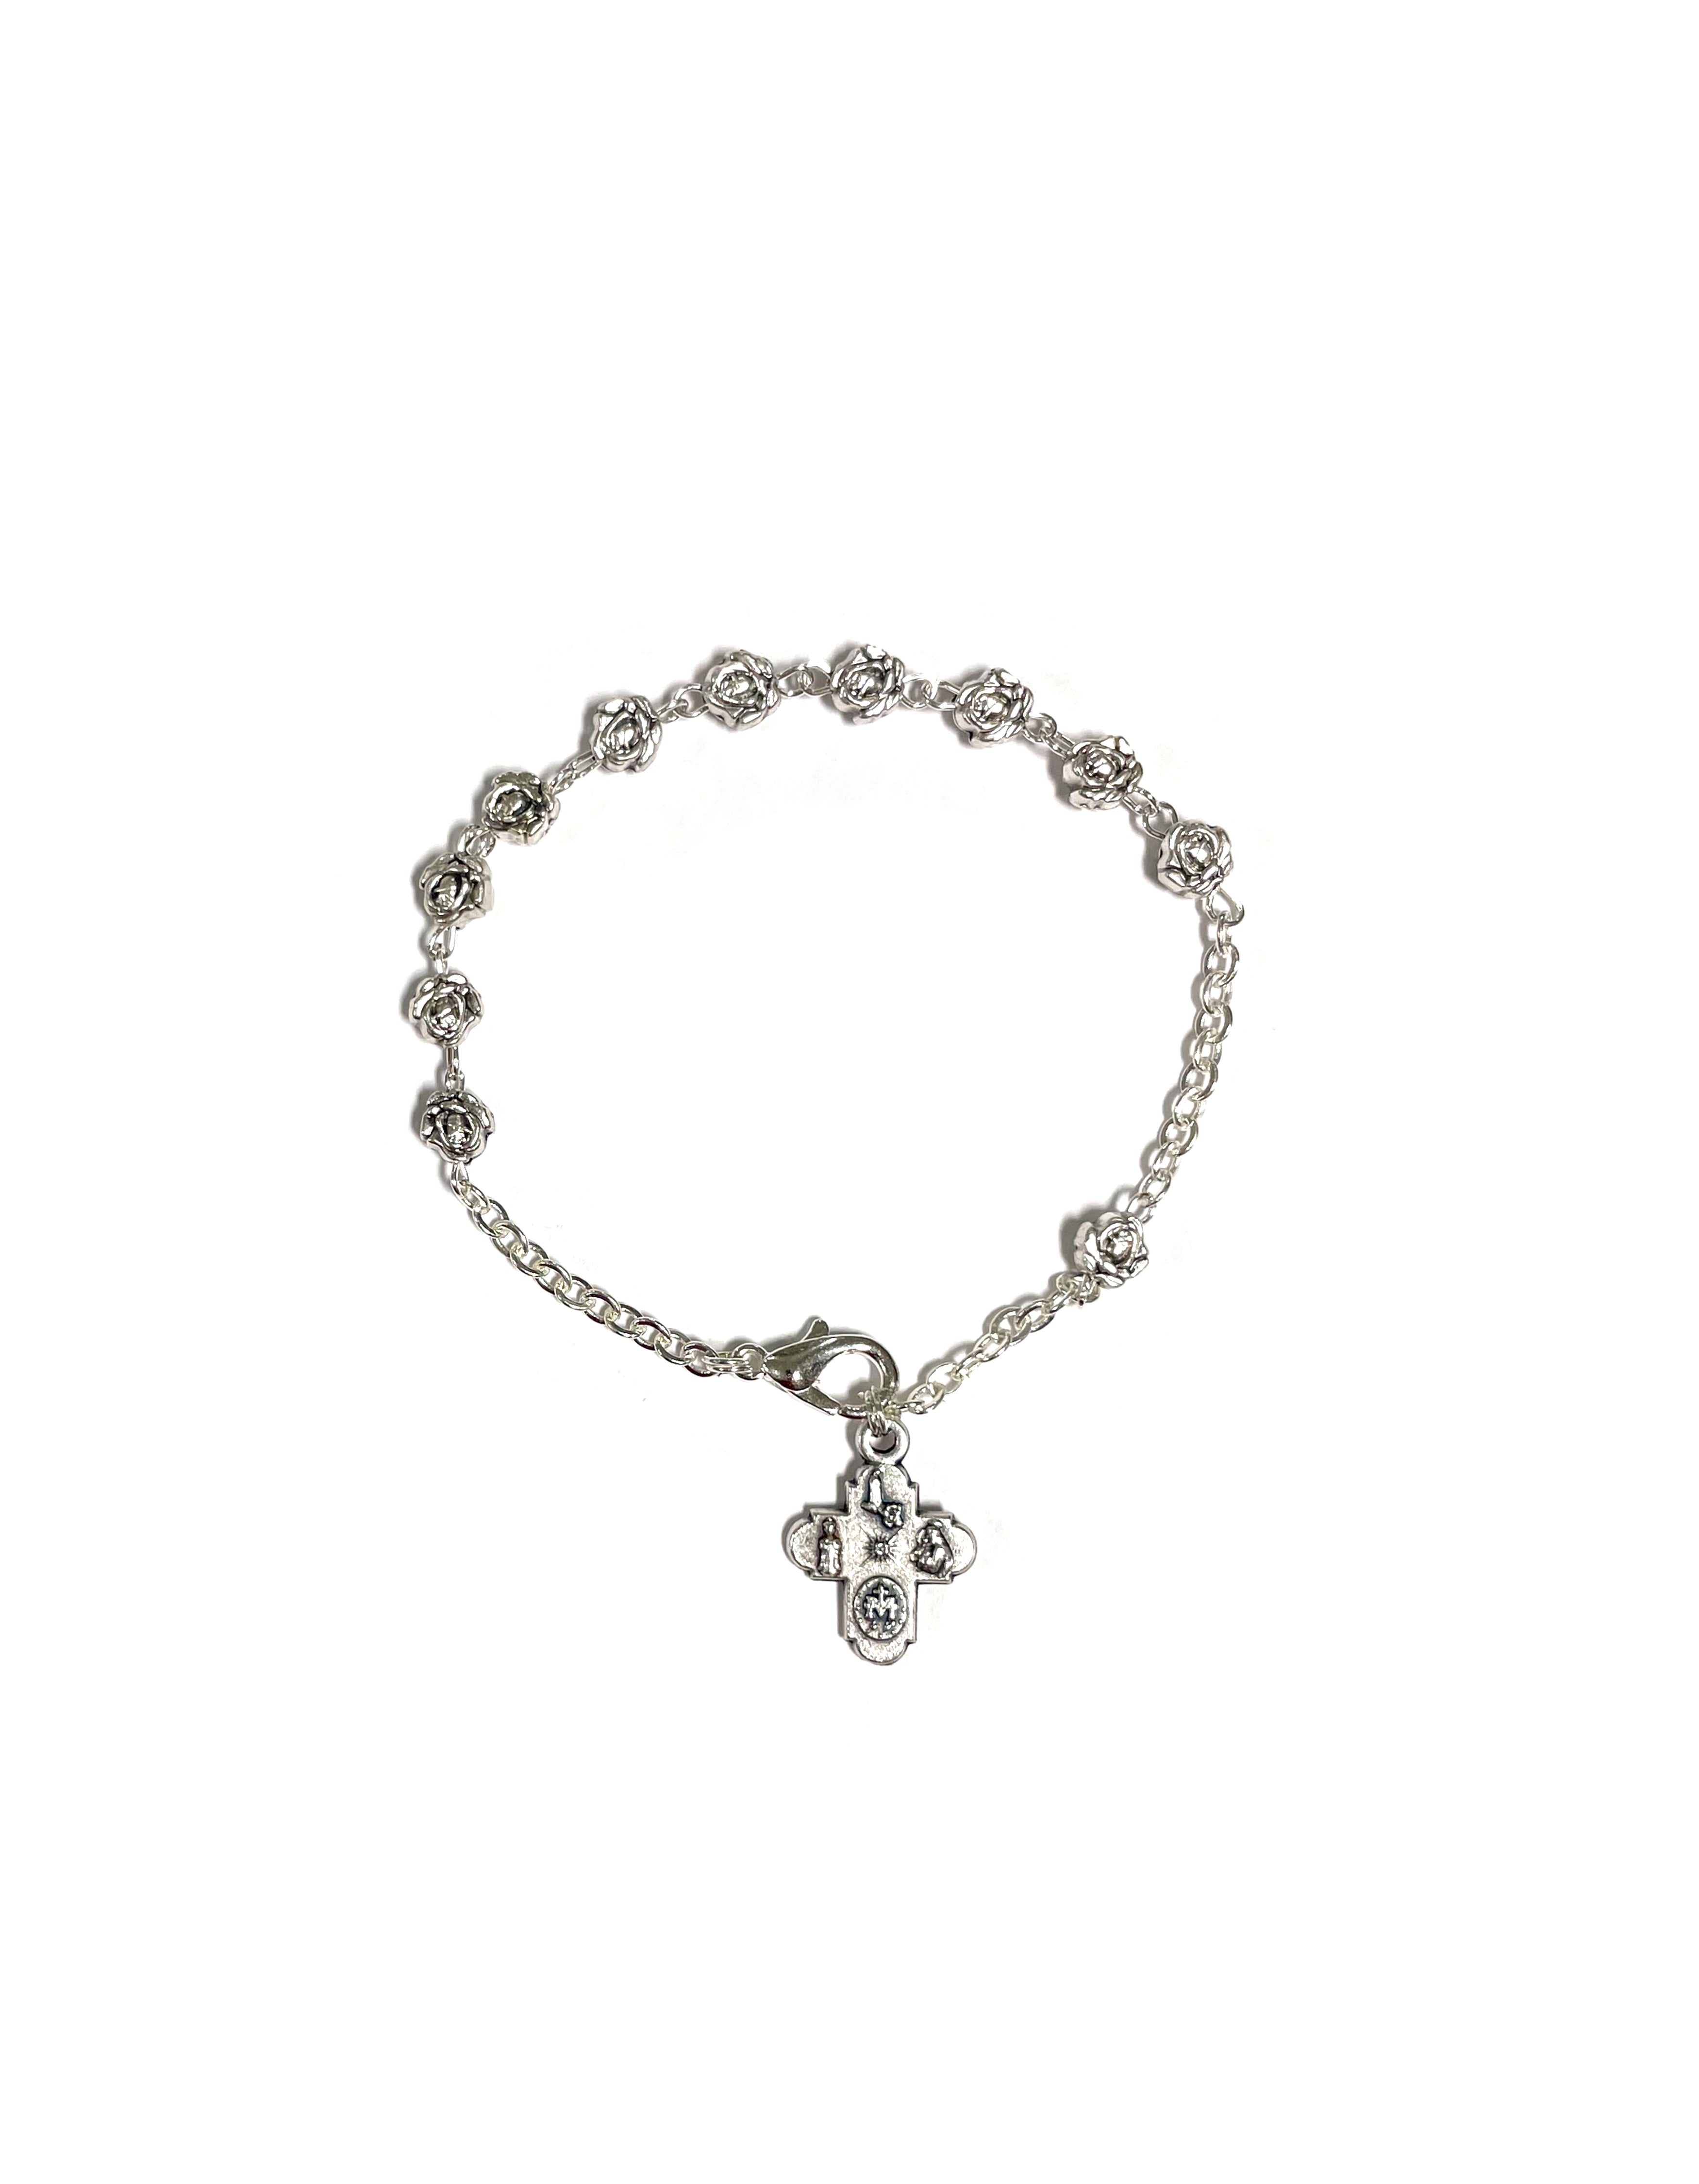 Oxidized silver decade bracelet with small five way cross and rose-shaped beads